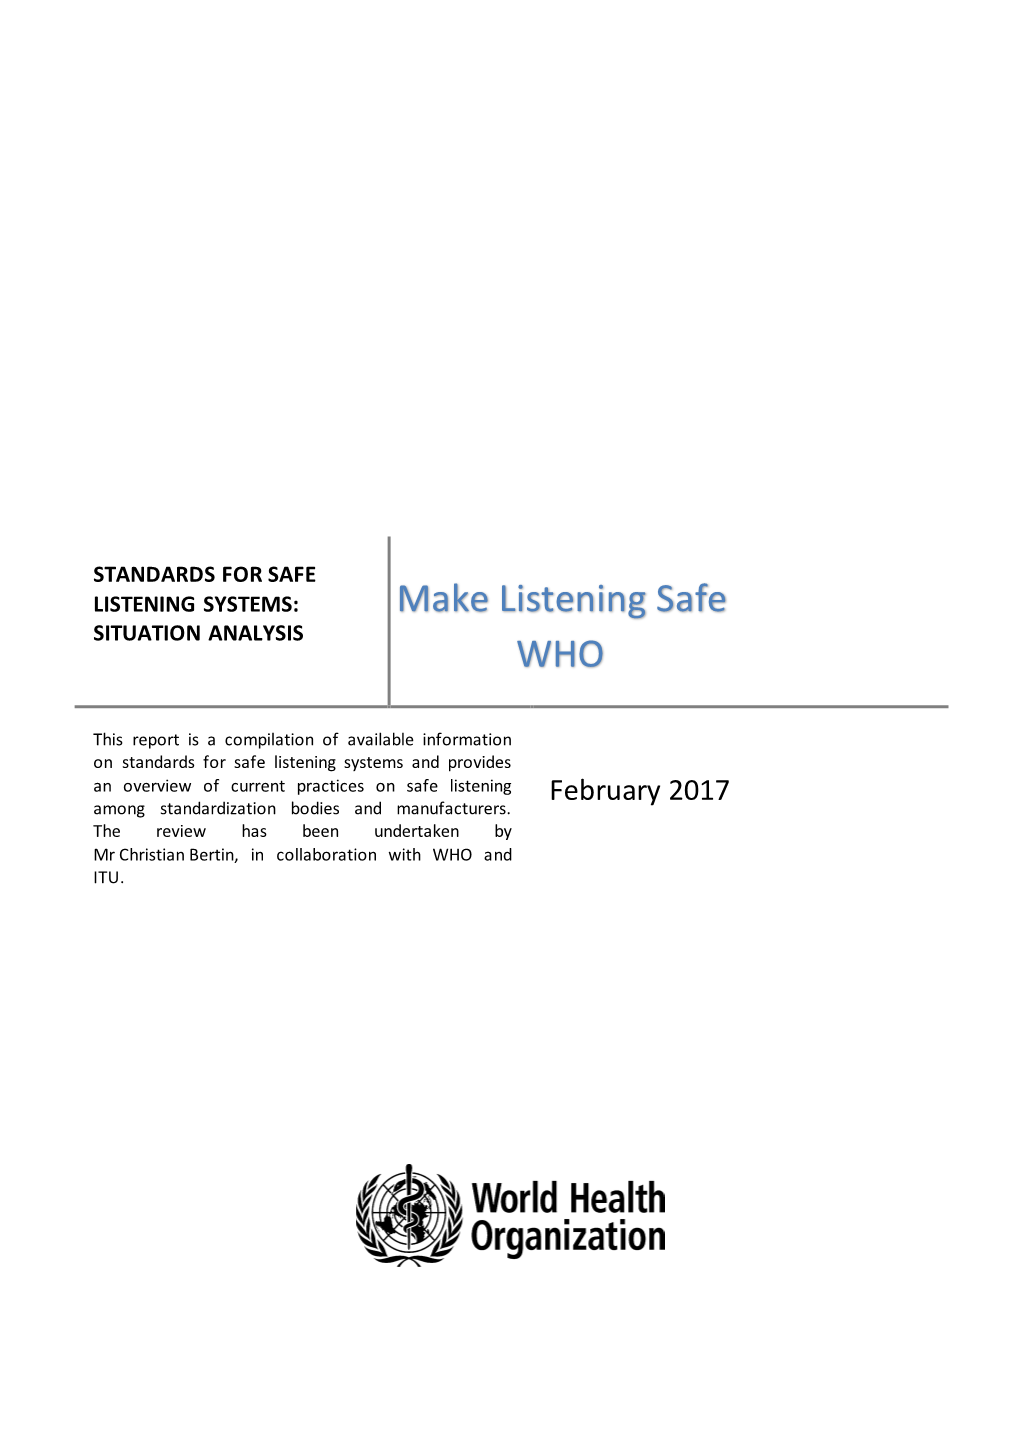 Standards for Safe Listening Systems: Situation Analysis